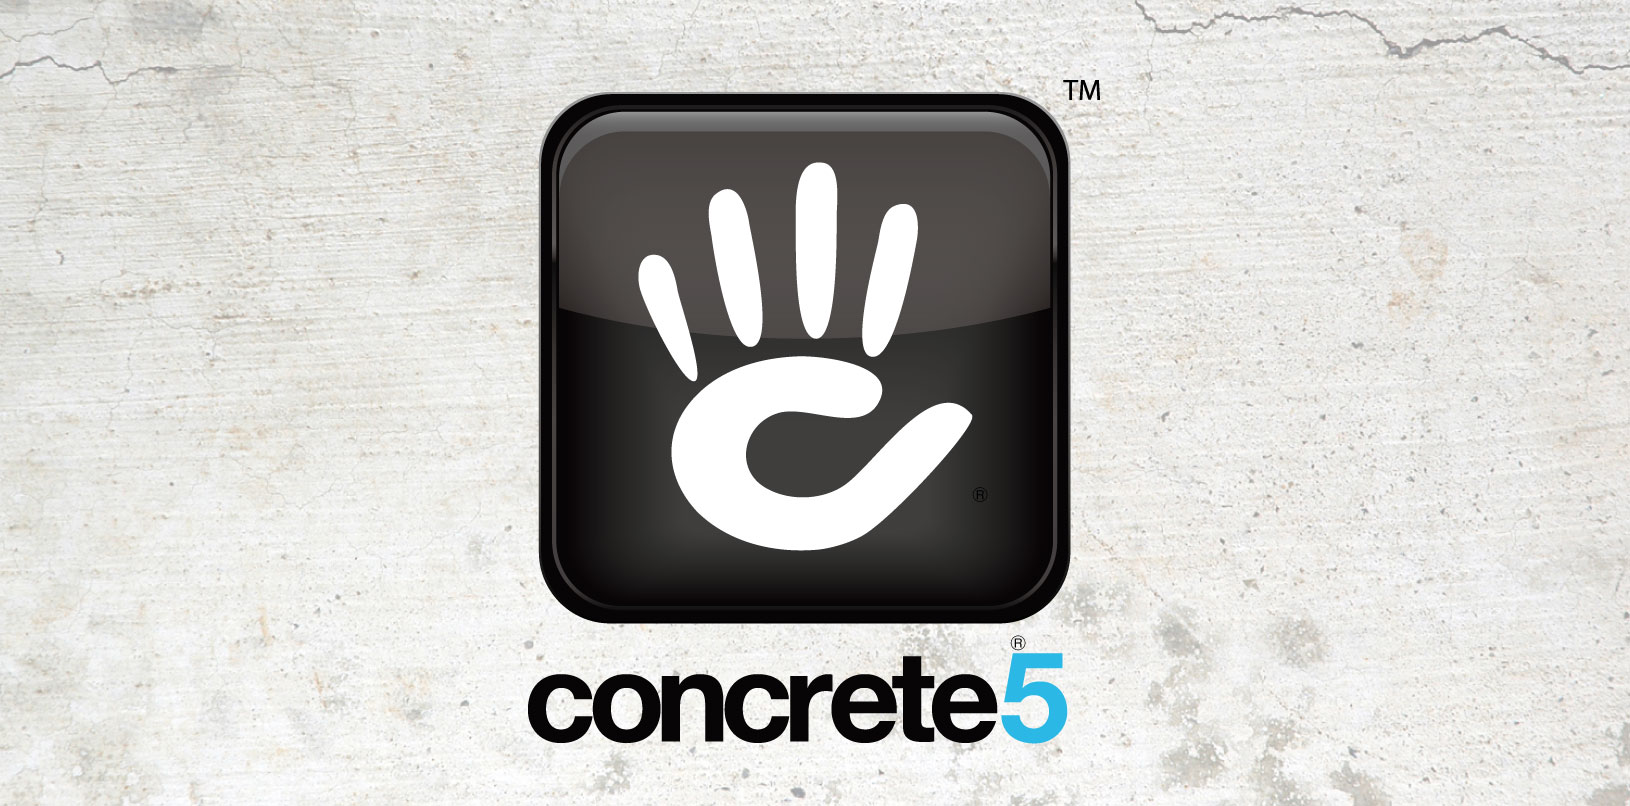 W3Tech says Usage of concrete5 grows by more than 40% per year